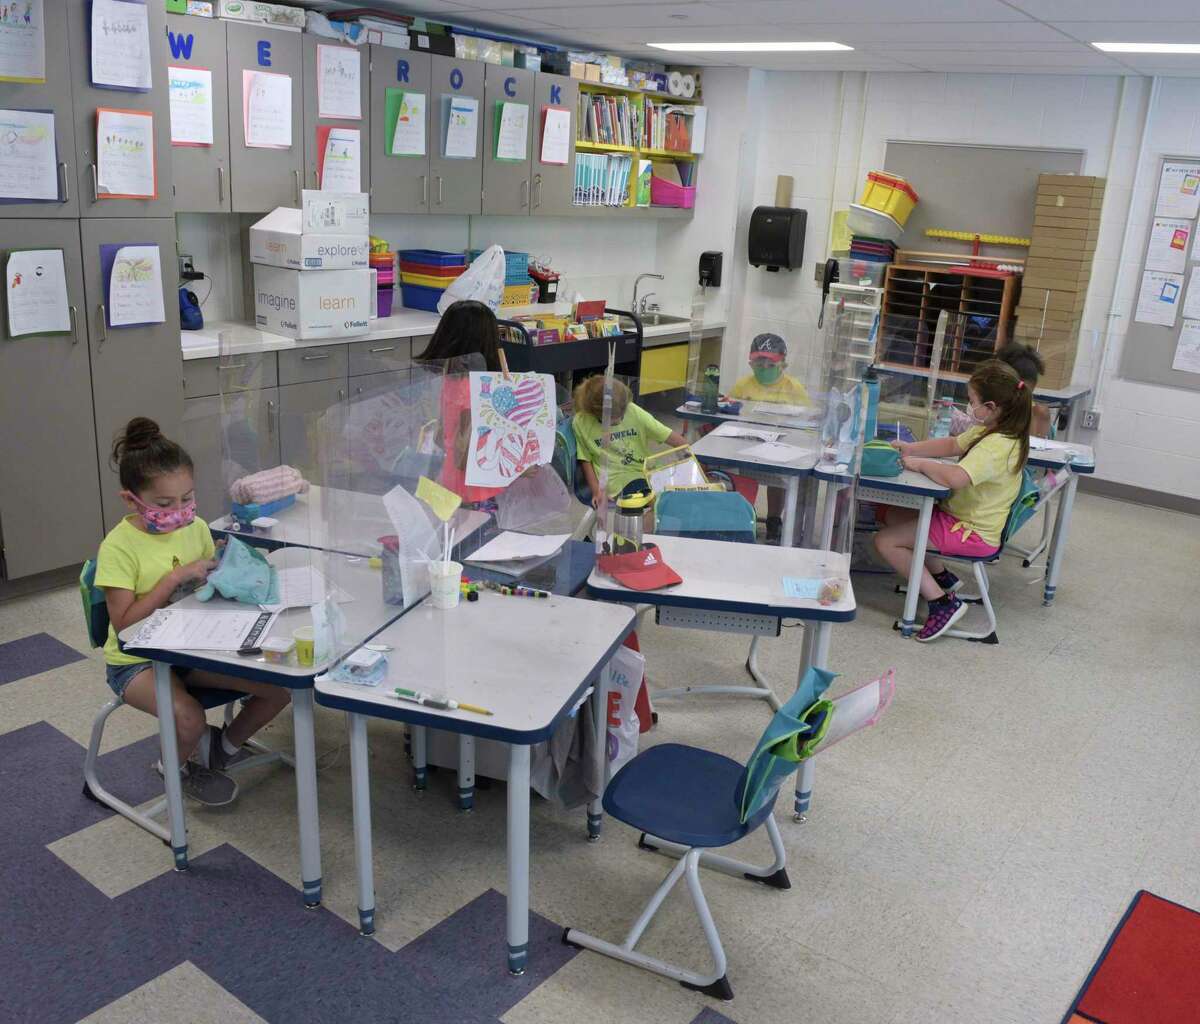 Anna H. Rockwell School classroom. Wednesday, June 16, 2021, in Bethel, Conn. Space is tight at the school, despite a recent renovation.